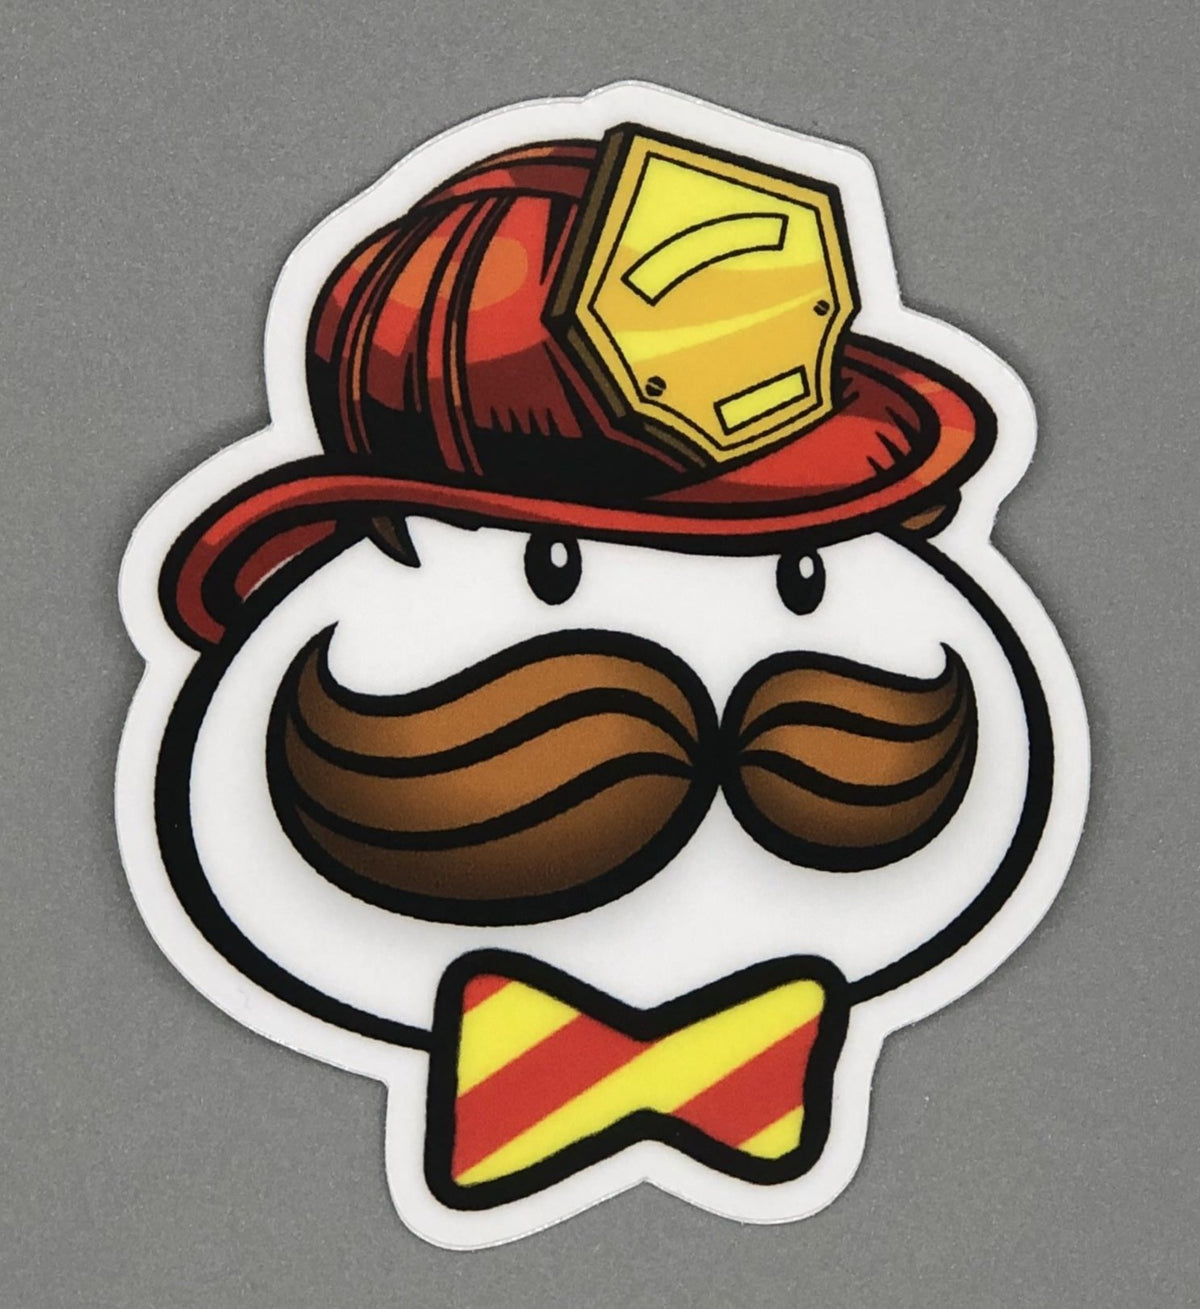 Salty Pringle’s firefighter | The Daily Medic